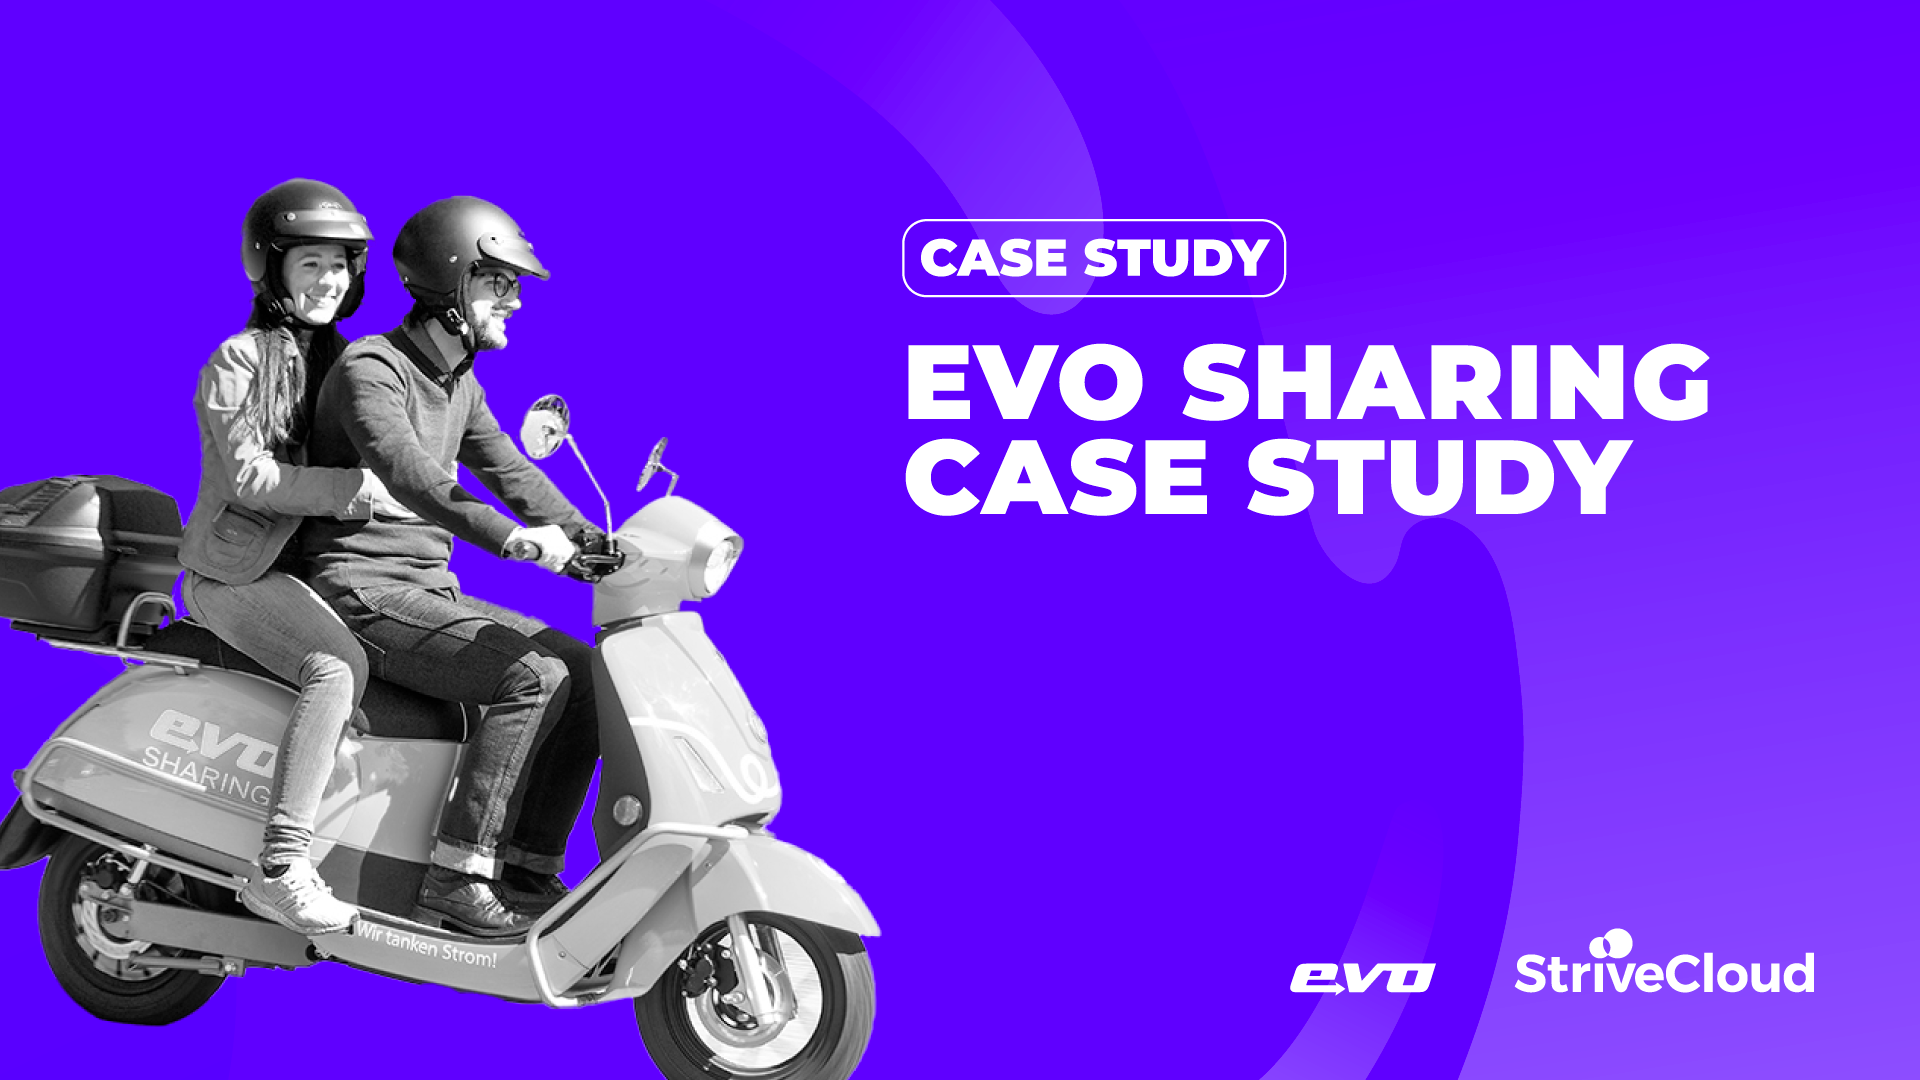 Evo Sharing - Case Study StriveCloud